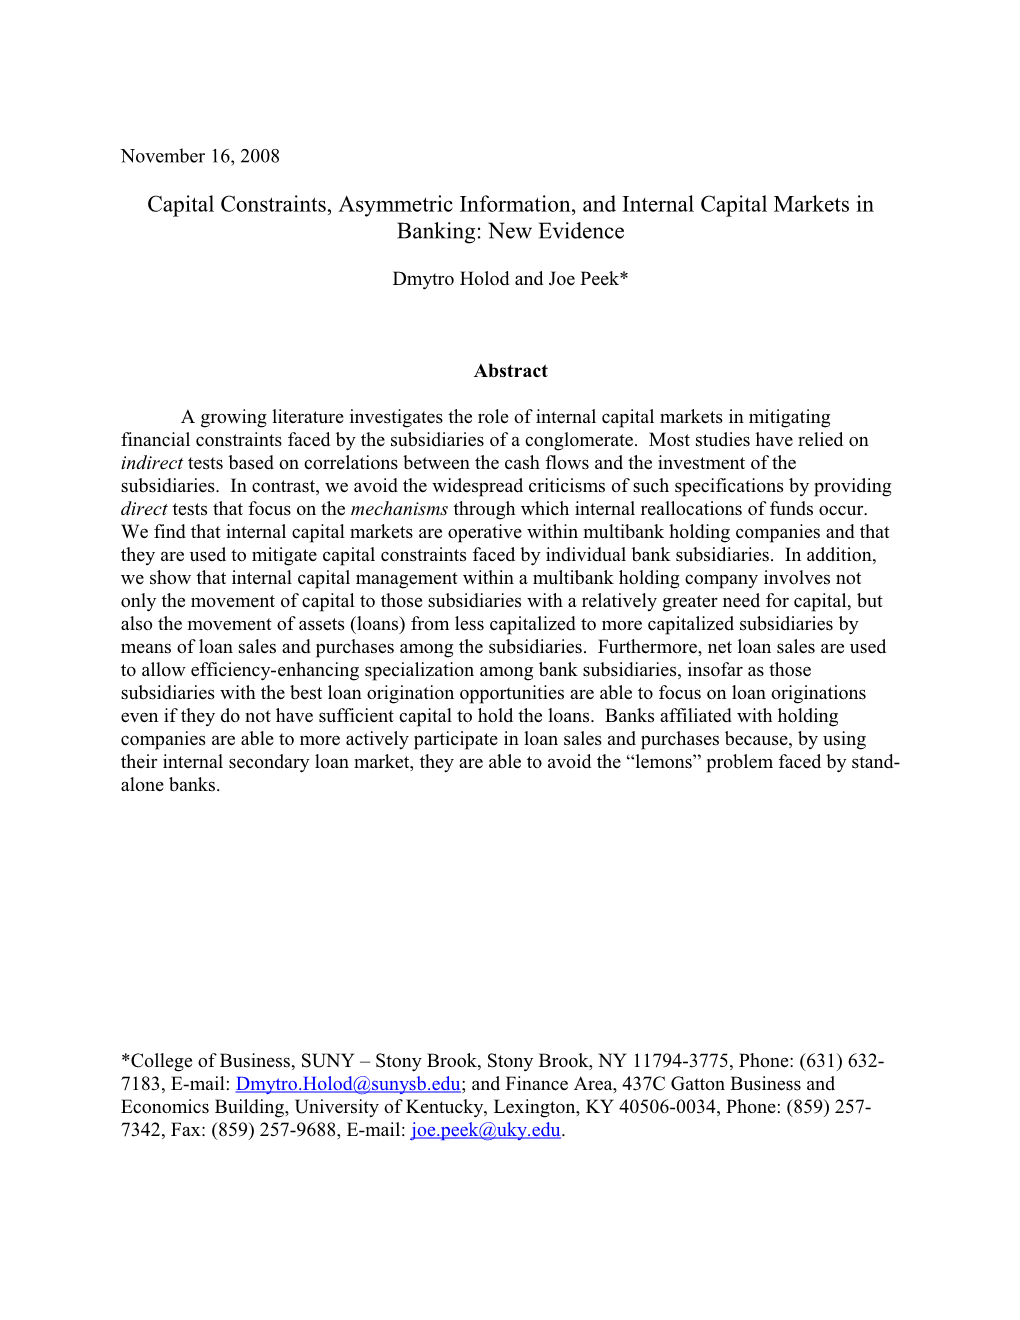 Capital Constraints, Asymmetric Information, and Internal Capital Markets in Banking: New